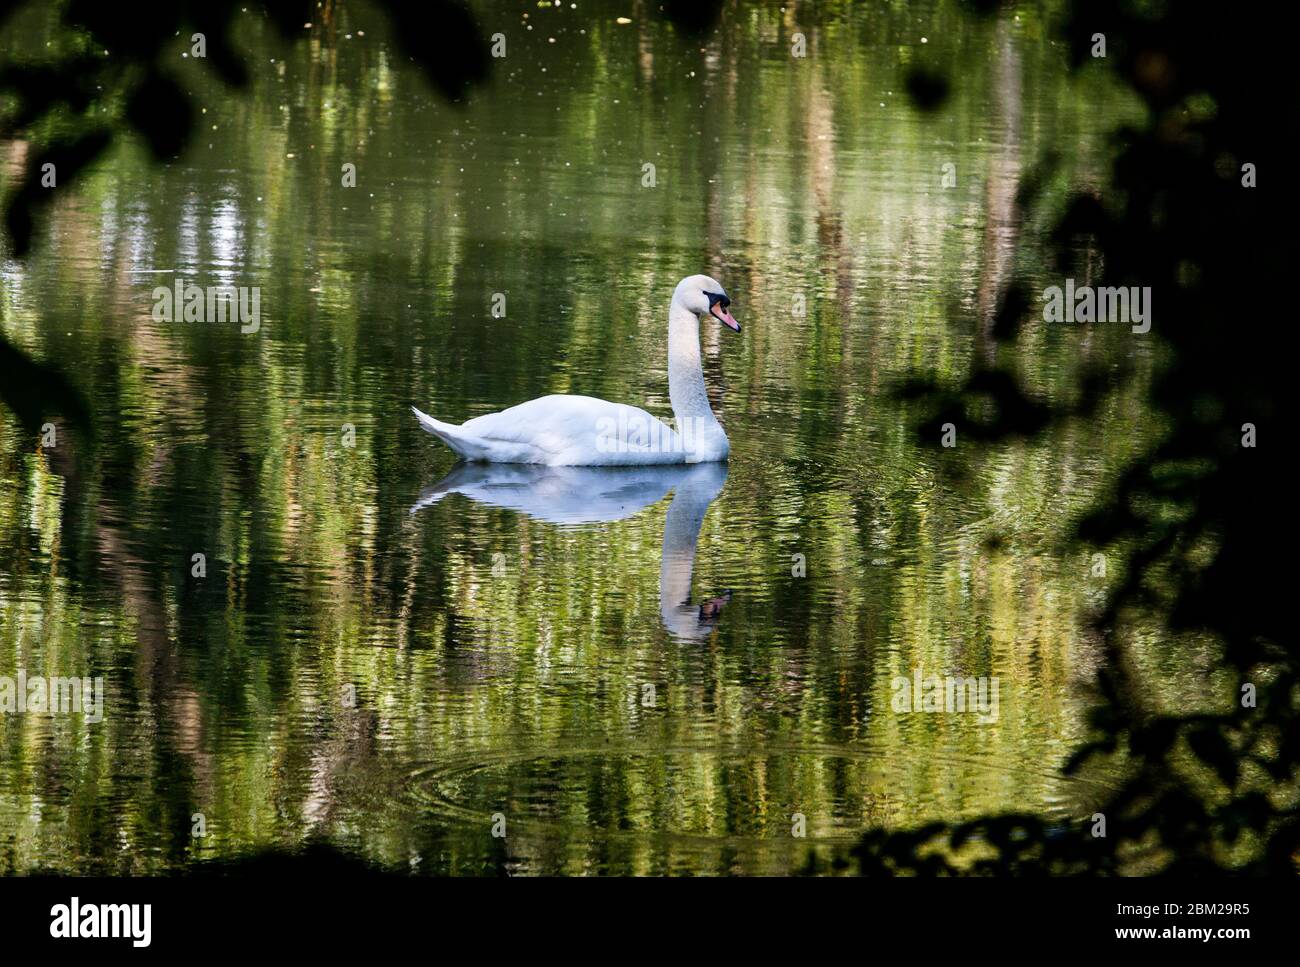 Chippenham, Wiltshire, UK, 6th May, 2020. With forecasters predicting colder weather for the weekend a swan is pictured taking advantage of some shade as it swims in the River Avon in Chippenham, Wiltshire.Credit: Lynchpics/Alamy Live News Stock Photo